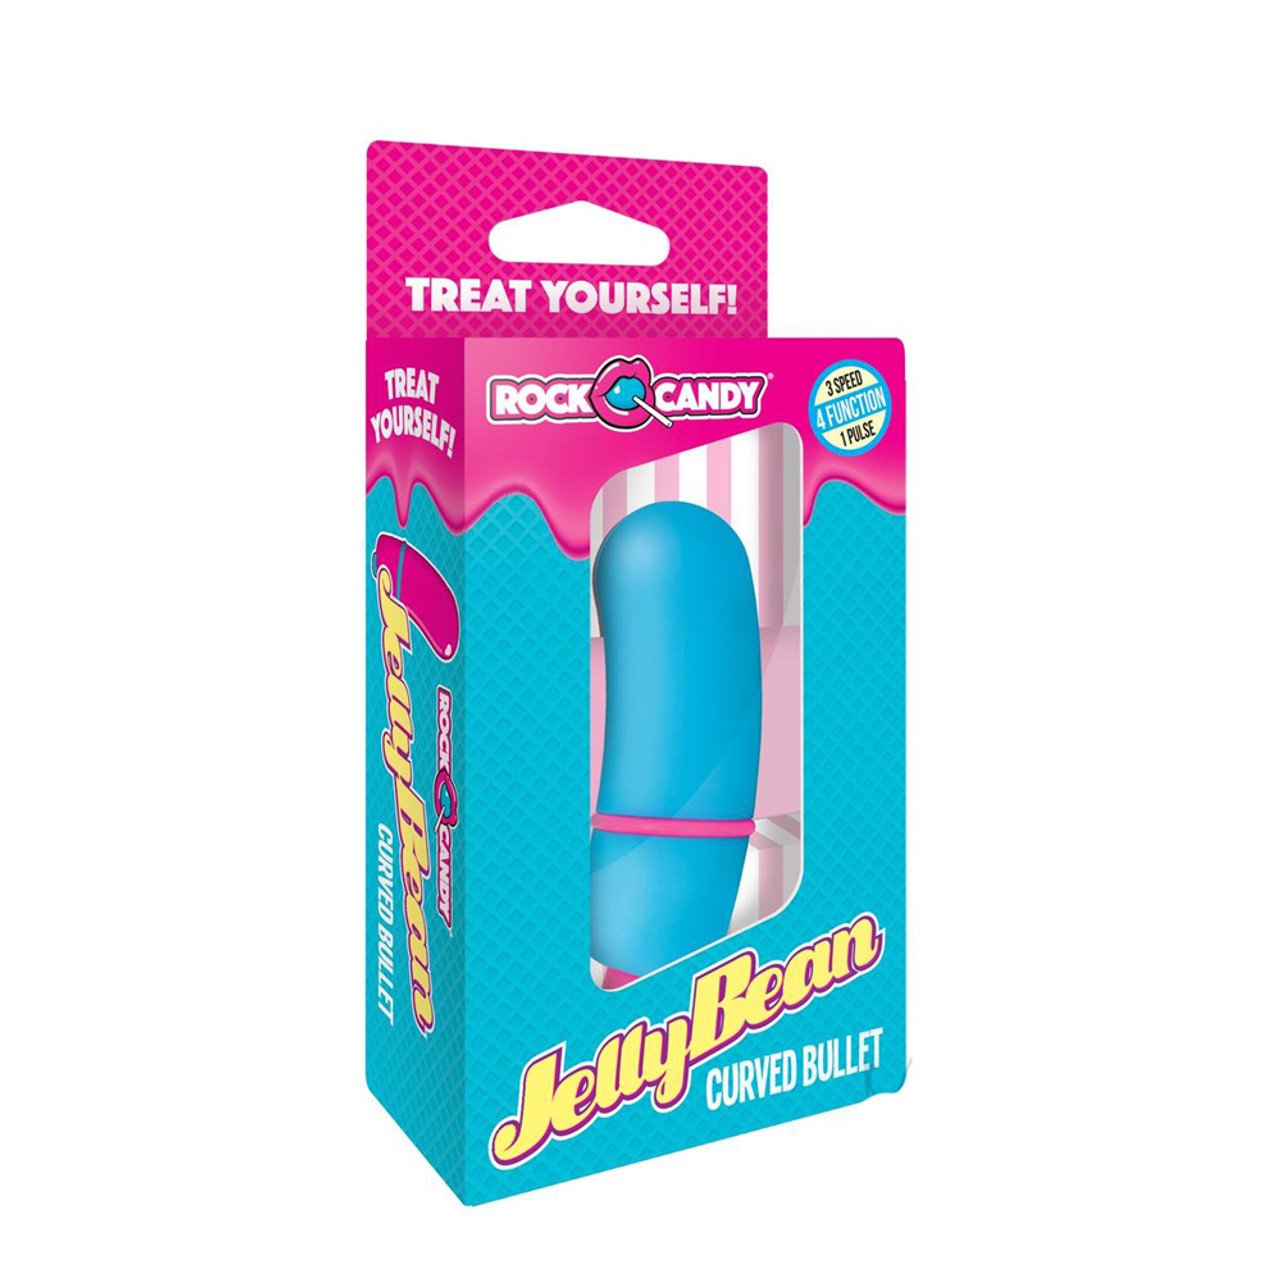 Buy The Jellybean 4 Function Curved Bullet Vibrator In Blue And Pink Rock Candy Sex Toys